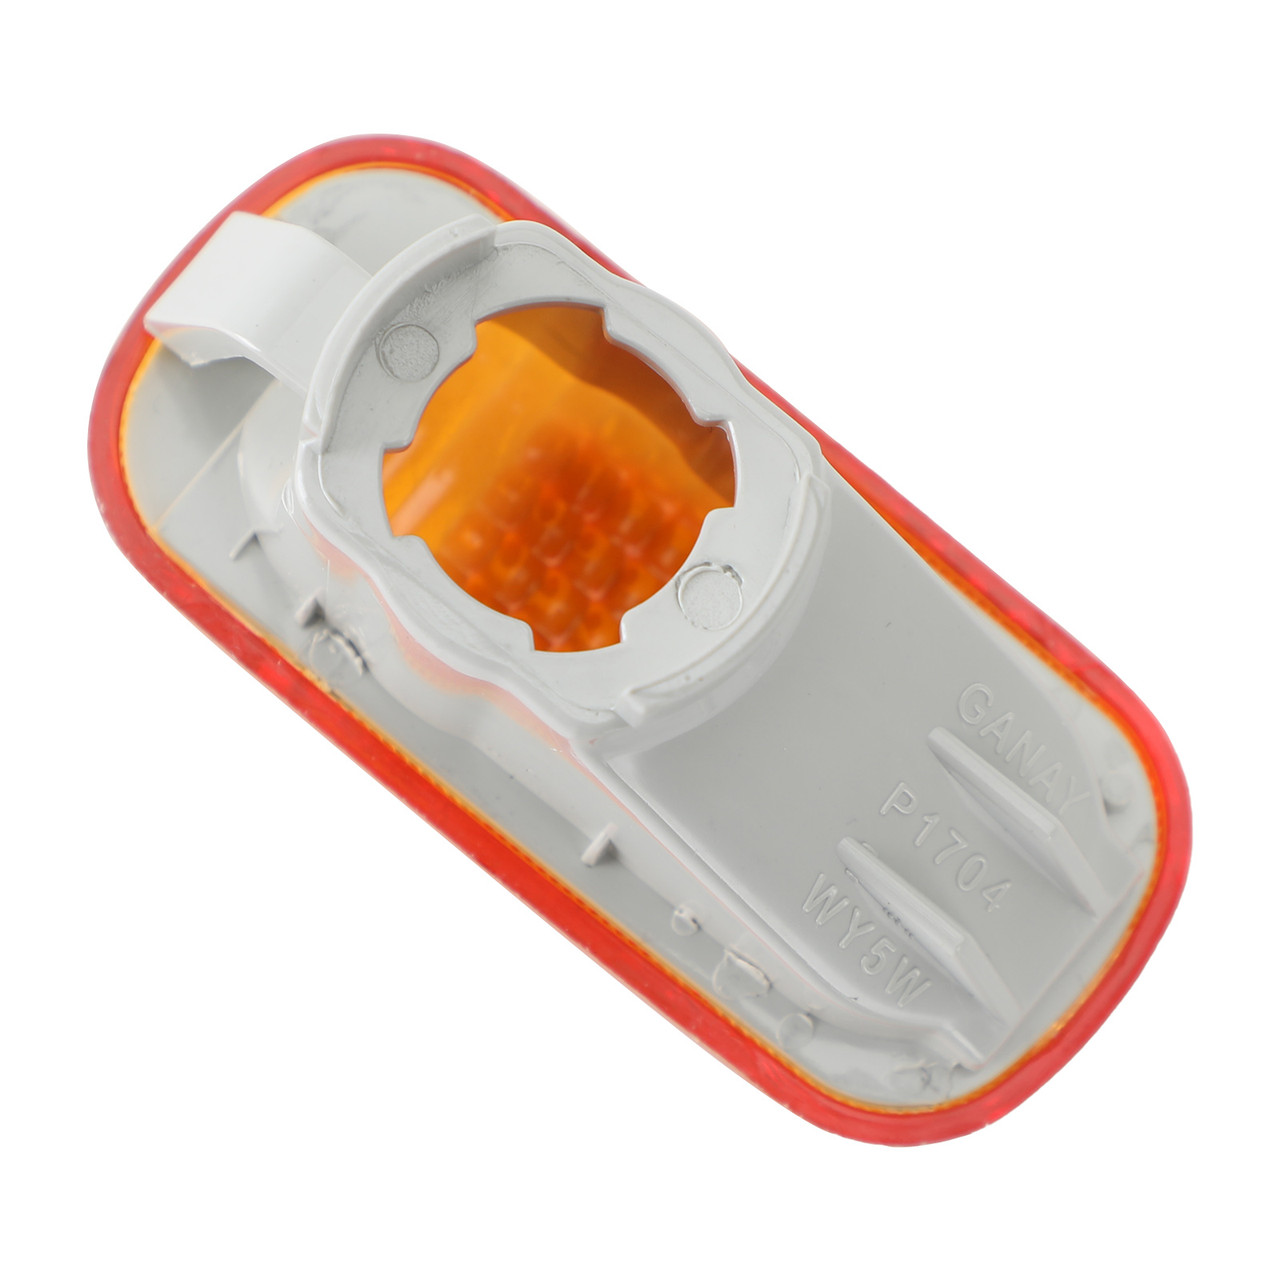 Turn Marker Signal Light Housing Cover Fit for Honda Civic EP3 Si Type R Si/ES Coupe Sedan Models Odyssey 02-05 Si FD1/FD2 Coupe City 06-08 Amber